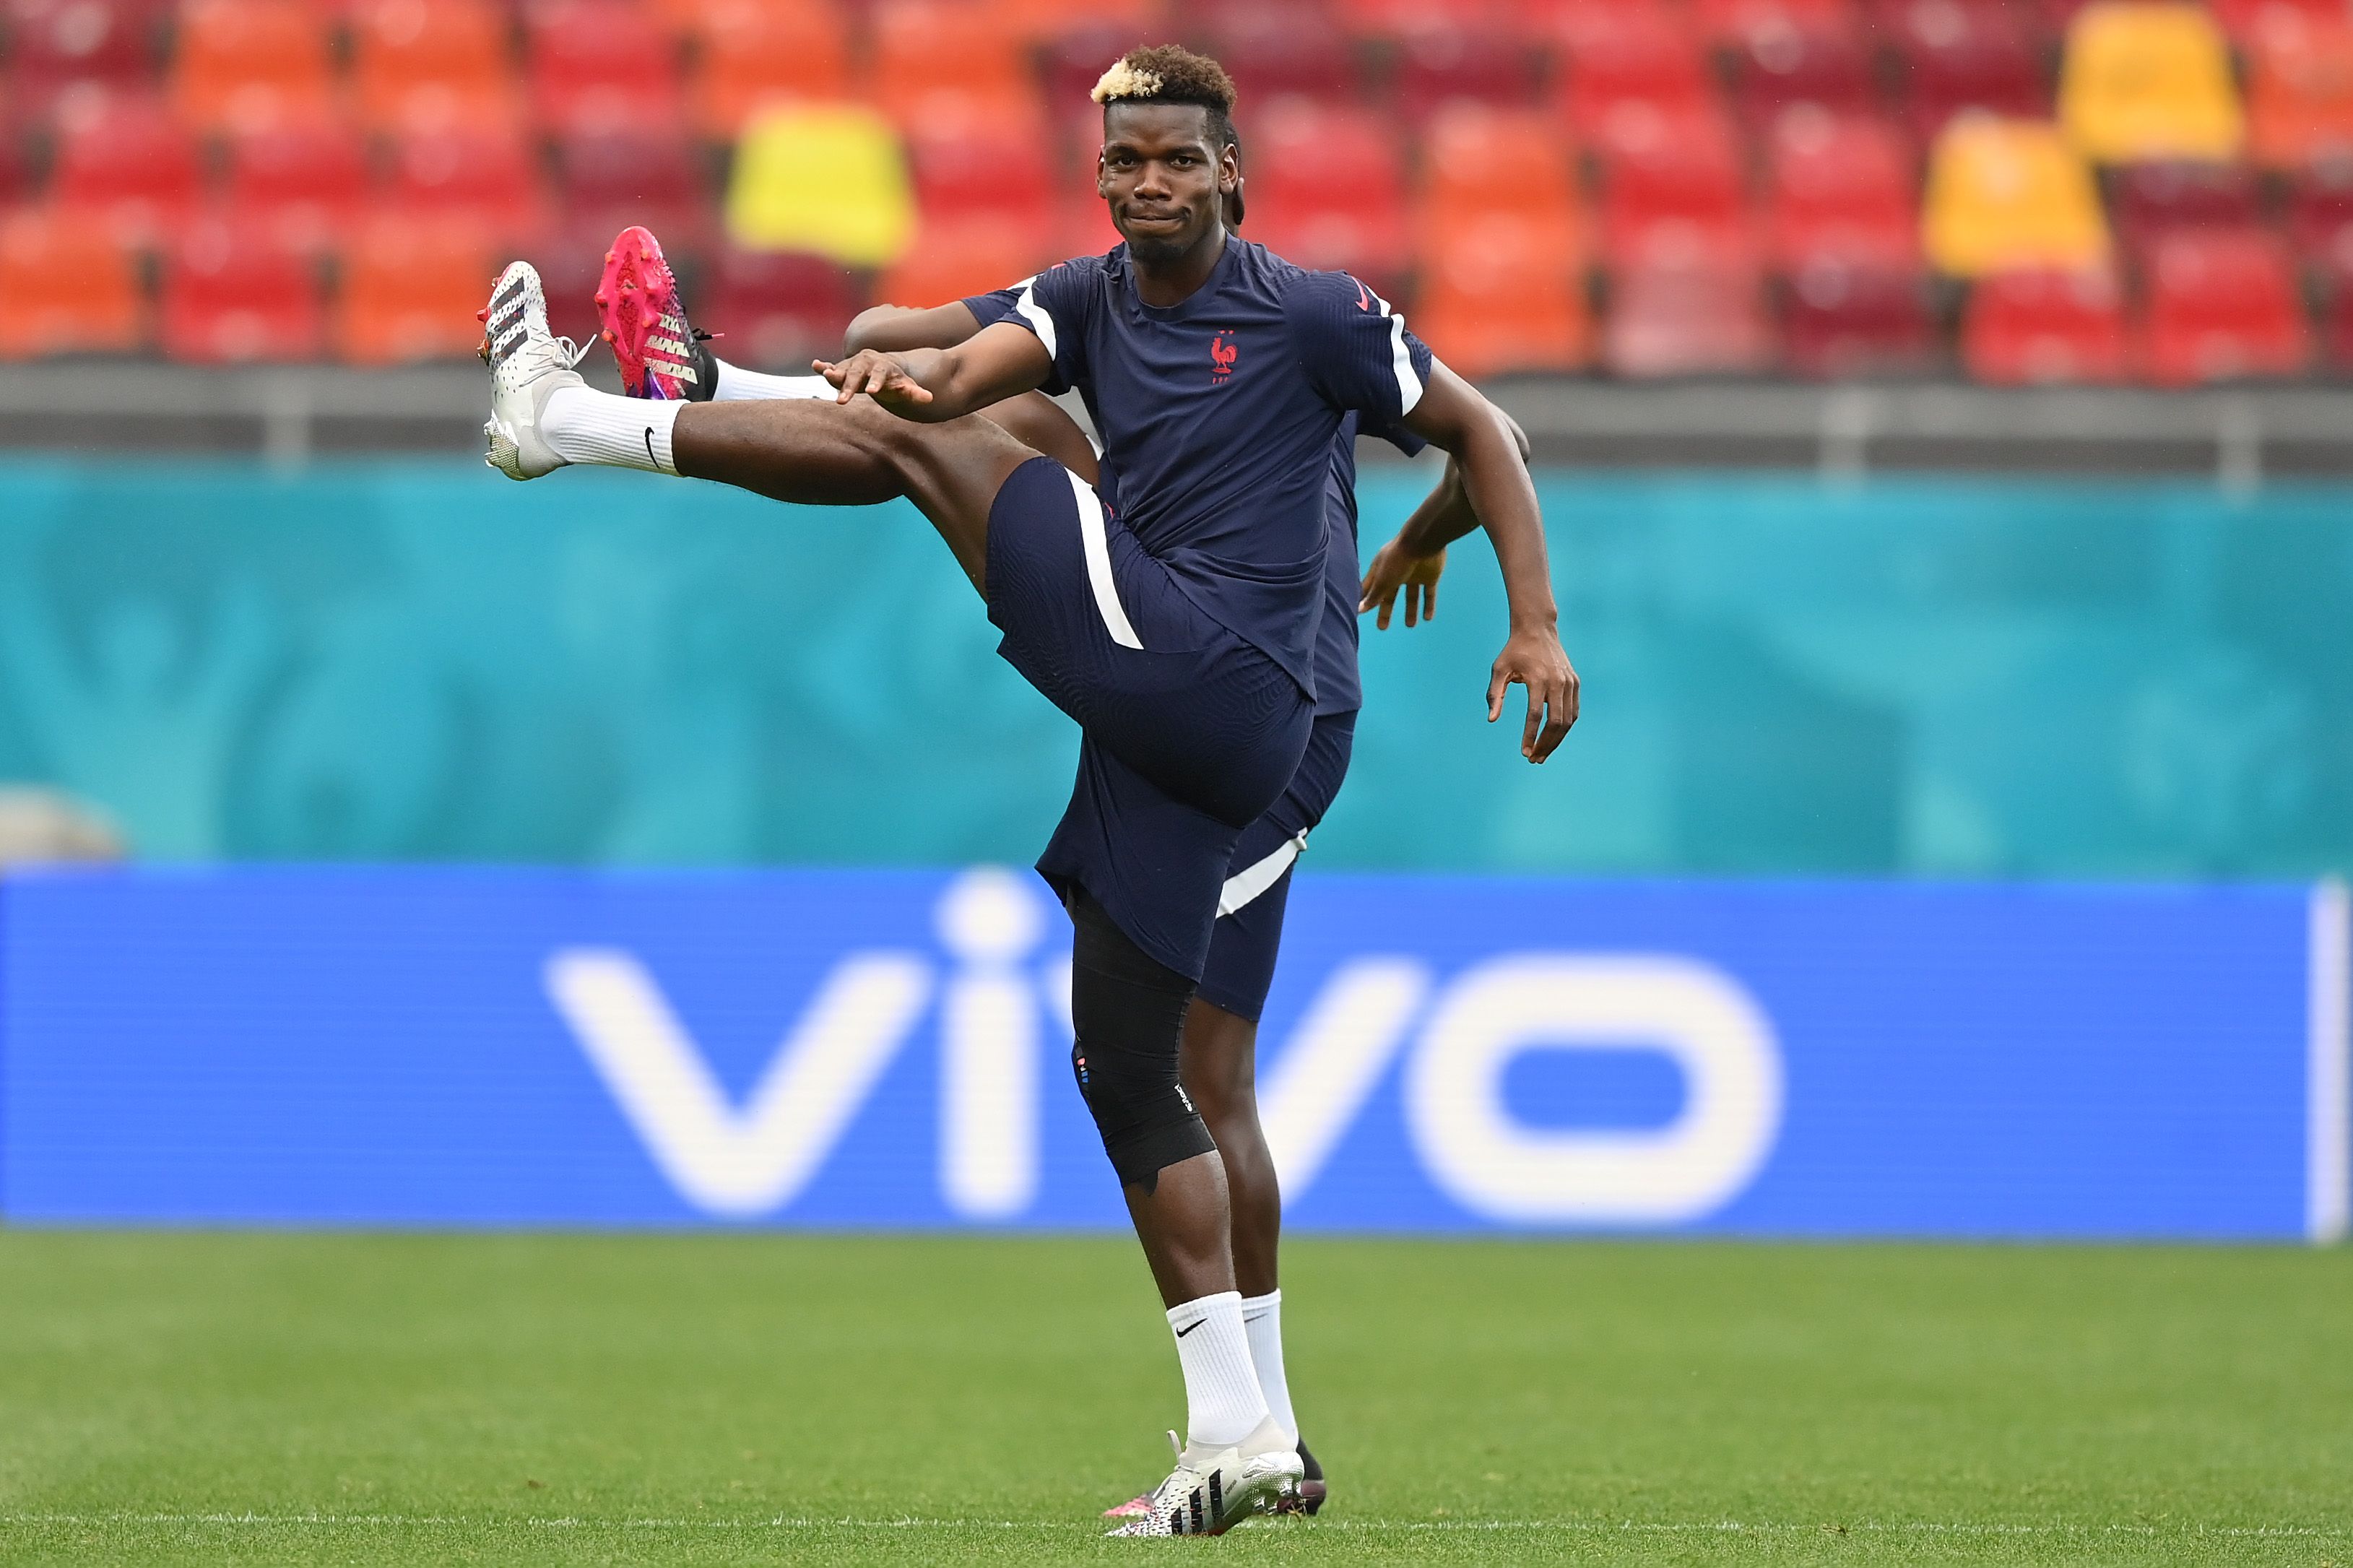 Paul Pogba of France stretches during the France Training Session ahead of the UEFA Euro 2020 Round of 16 match between France and Switzerland at National Arena on June 27, 2021 in Bucharest, Romania